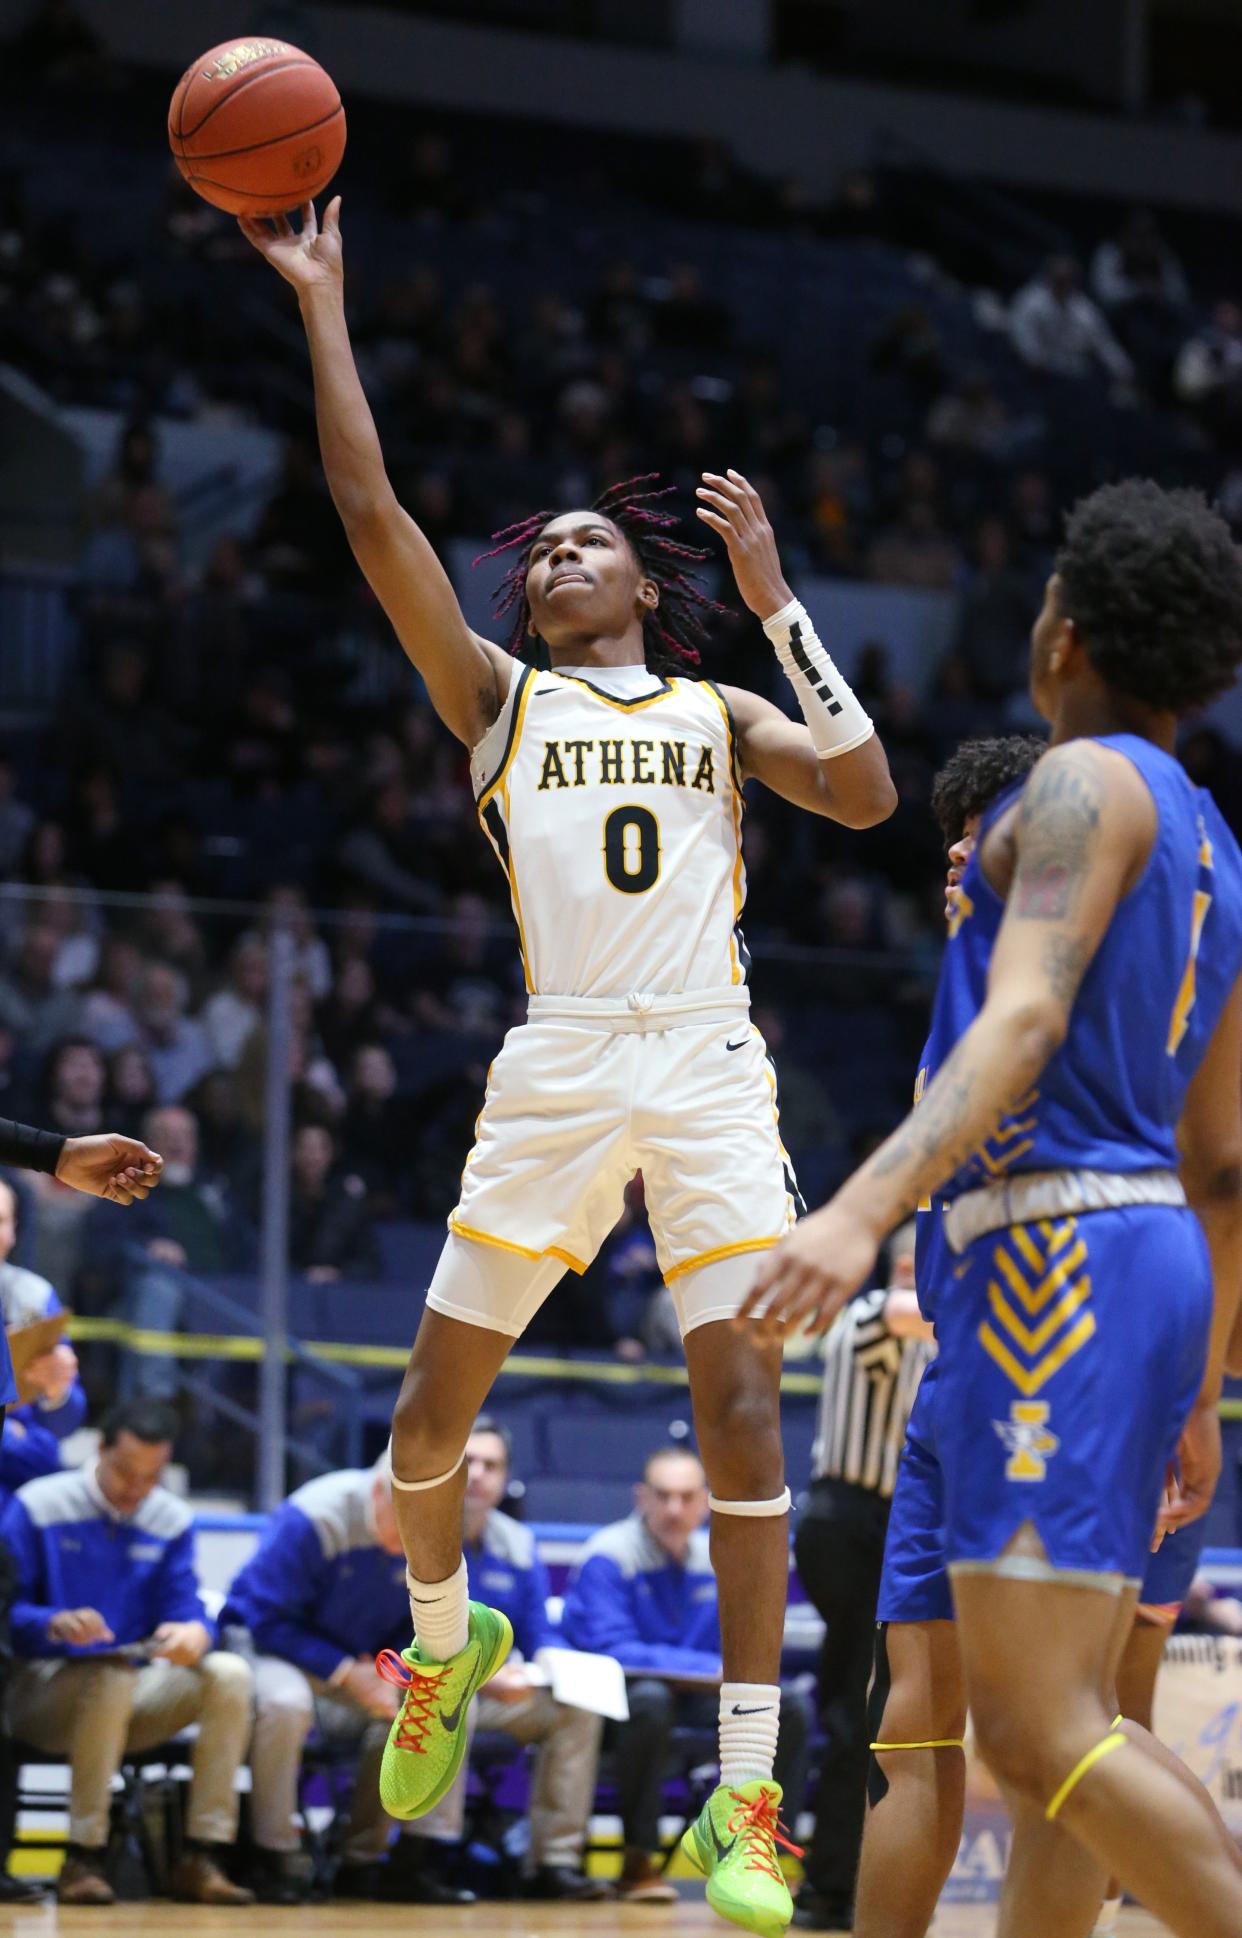 Athena's I'zick Reaves drives in to score in the first quarter during their Class A1 Championship final Saturday, March 4, 2023 a the Blue Cross Arena.